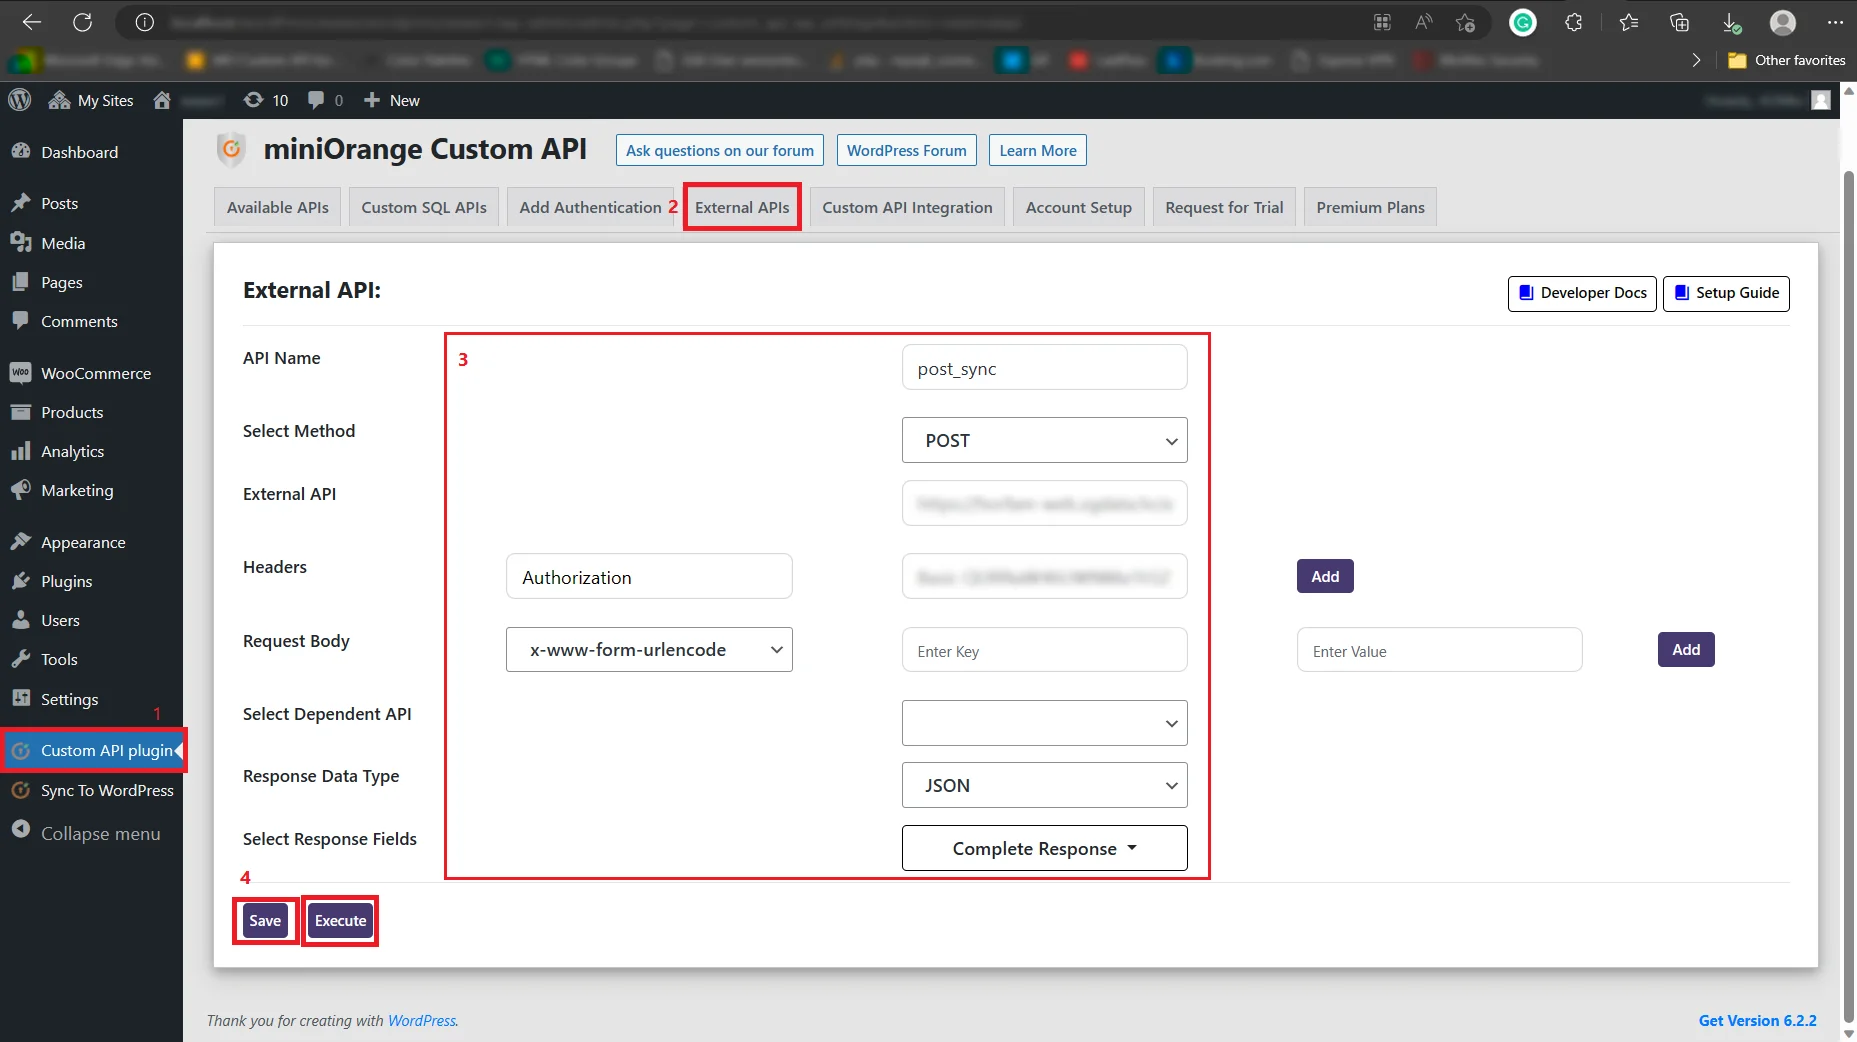 Enable  Hubspot Single Sign-On(SSO)  Login using Azure Ad as Identity Provider
           